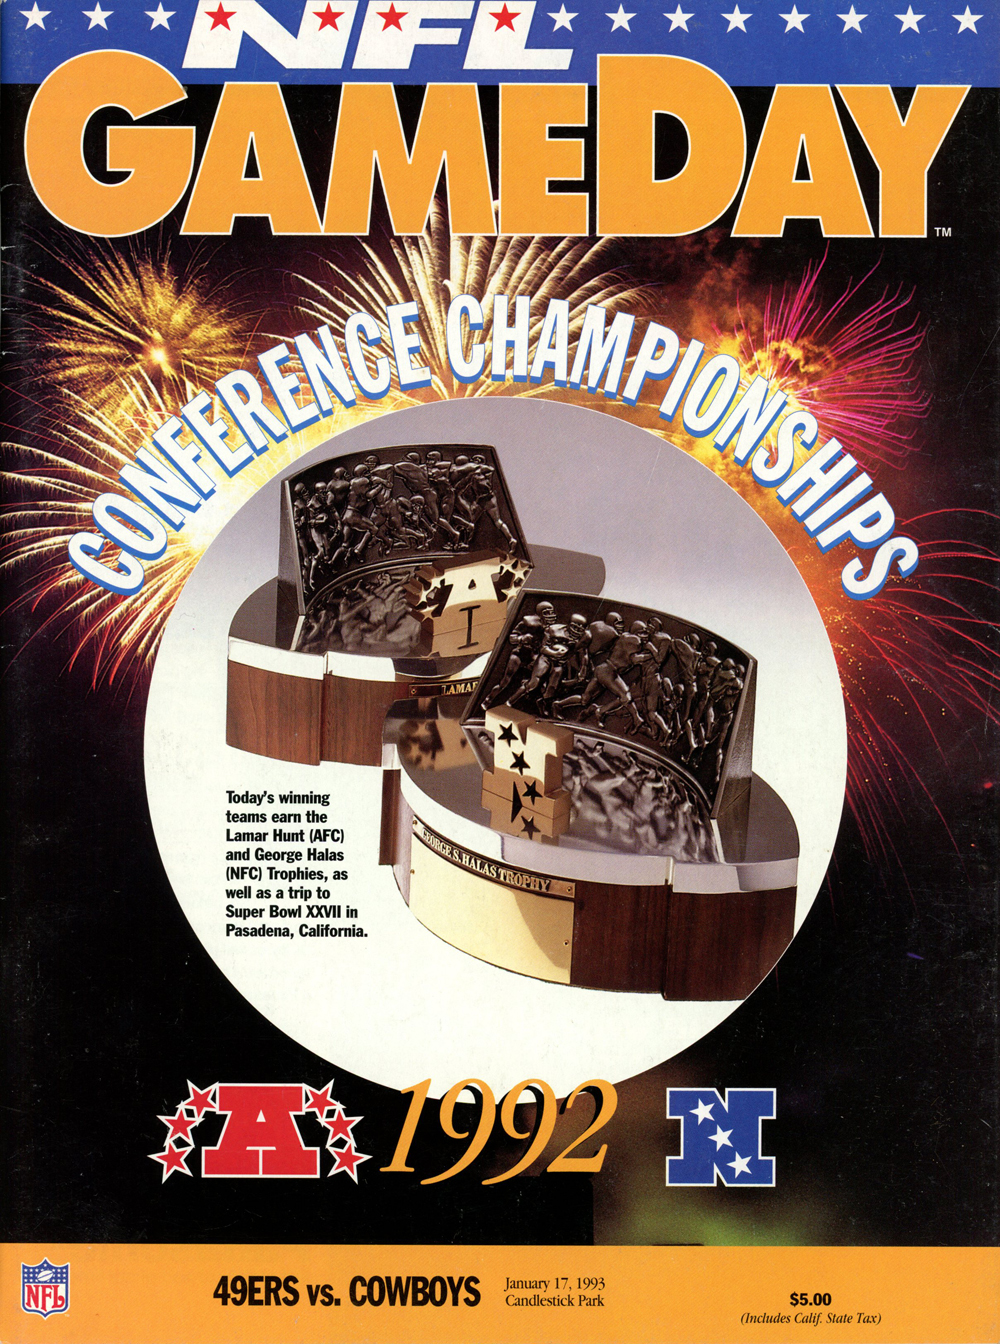 NFL Gameday Magazine 1992 Conference Championships 49ers vs Cowboys